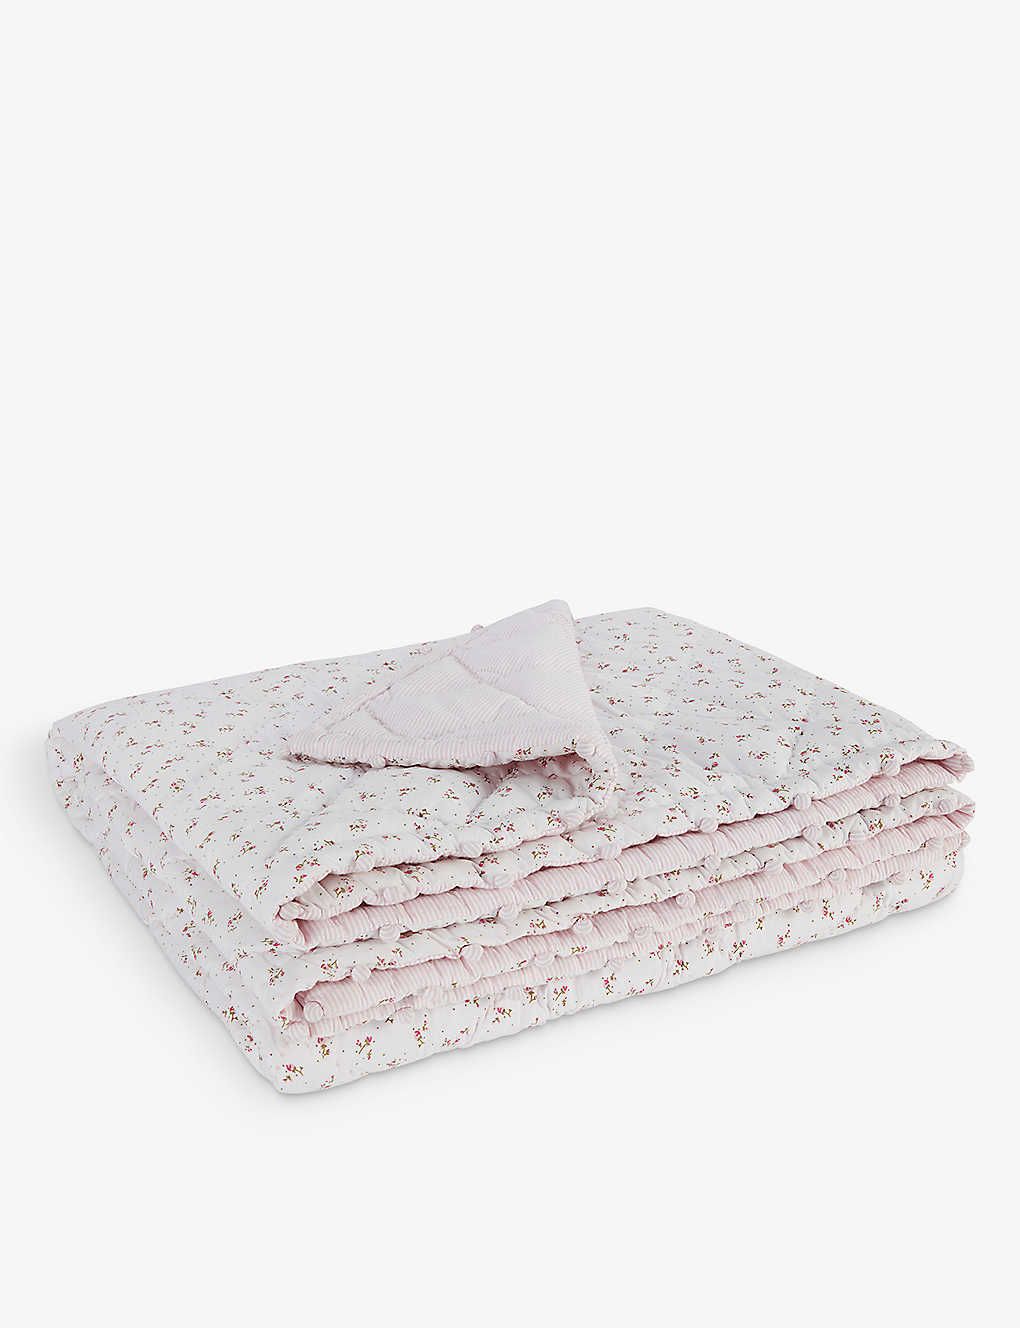 The Little White Company Pink Floral-print Reversible Quilted Cotton Single Blanket 165cm X 200cm